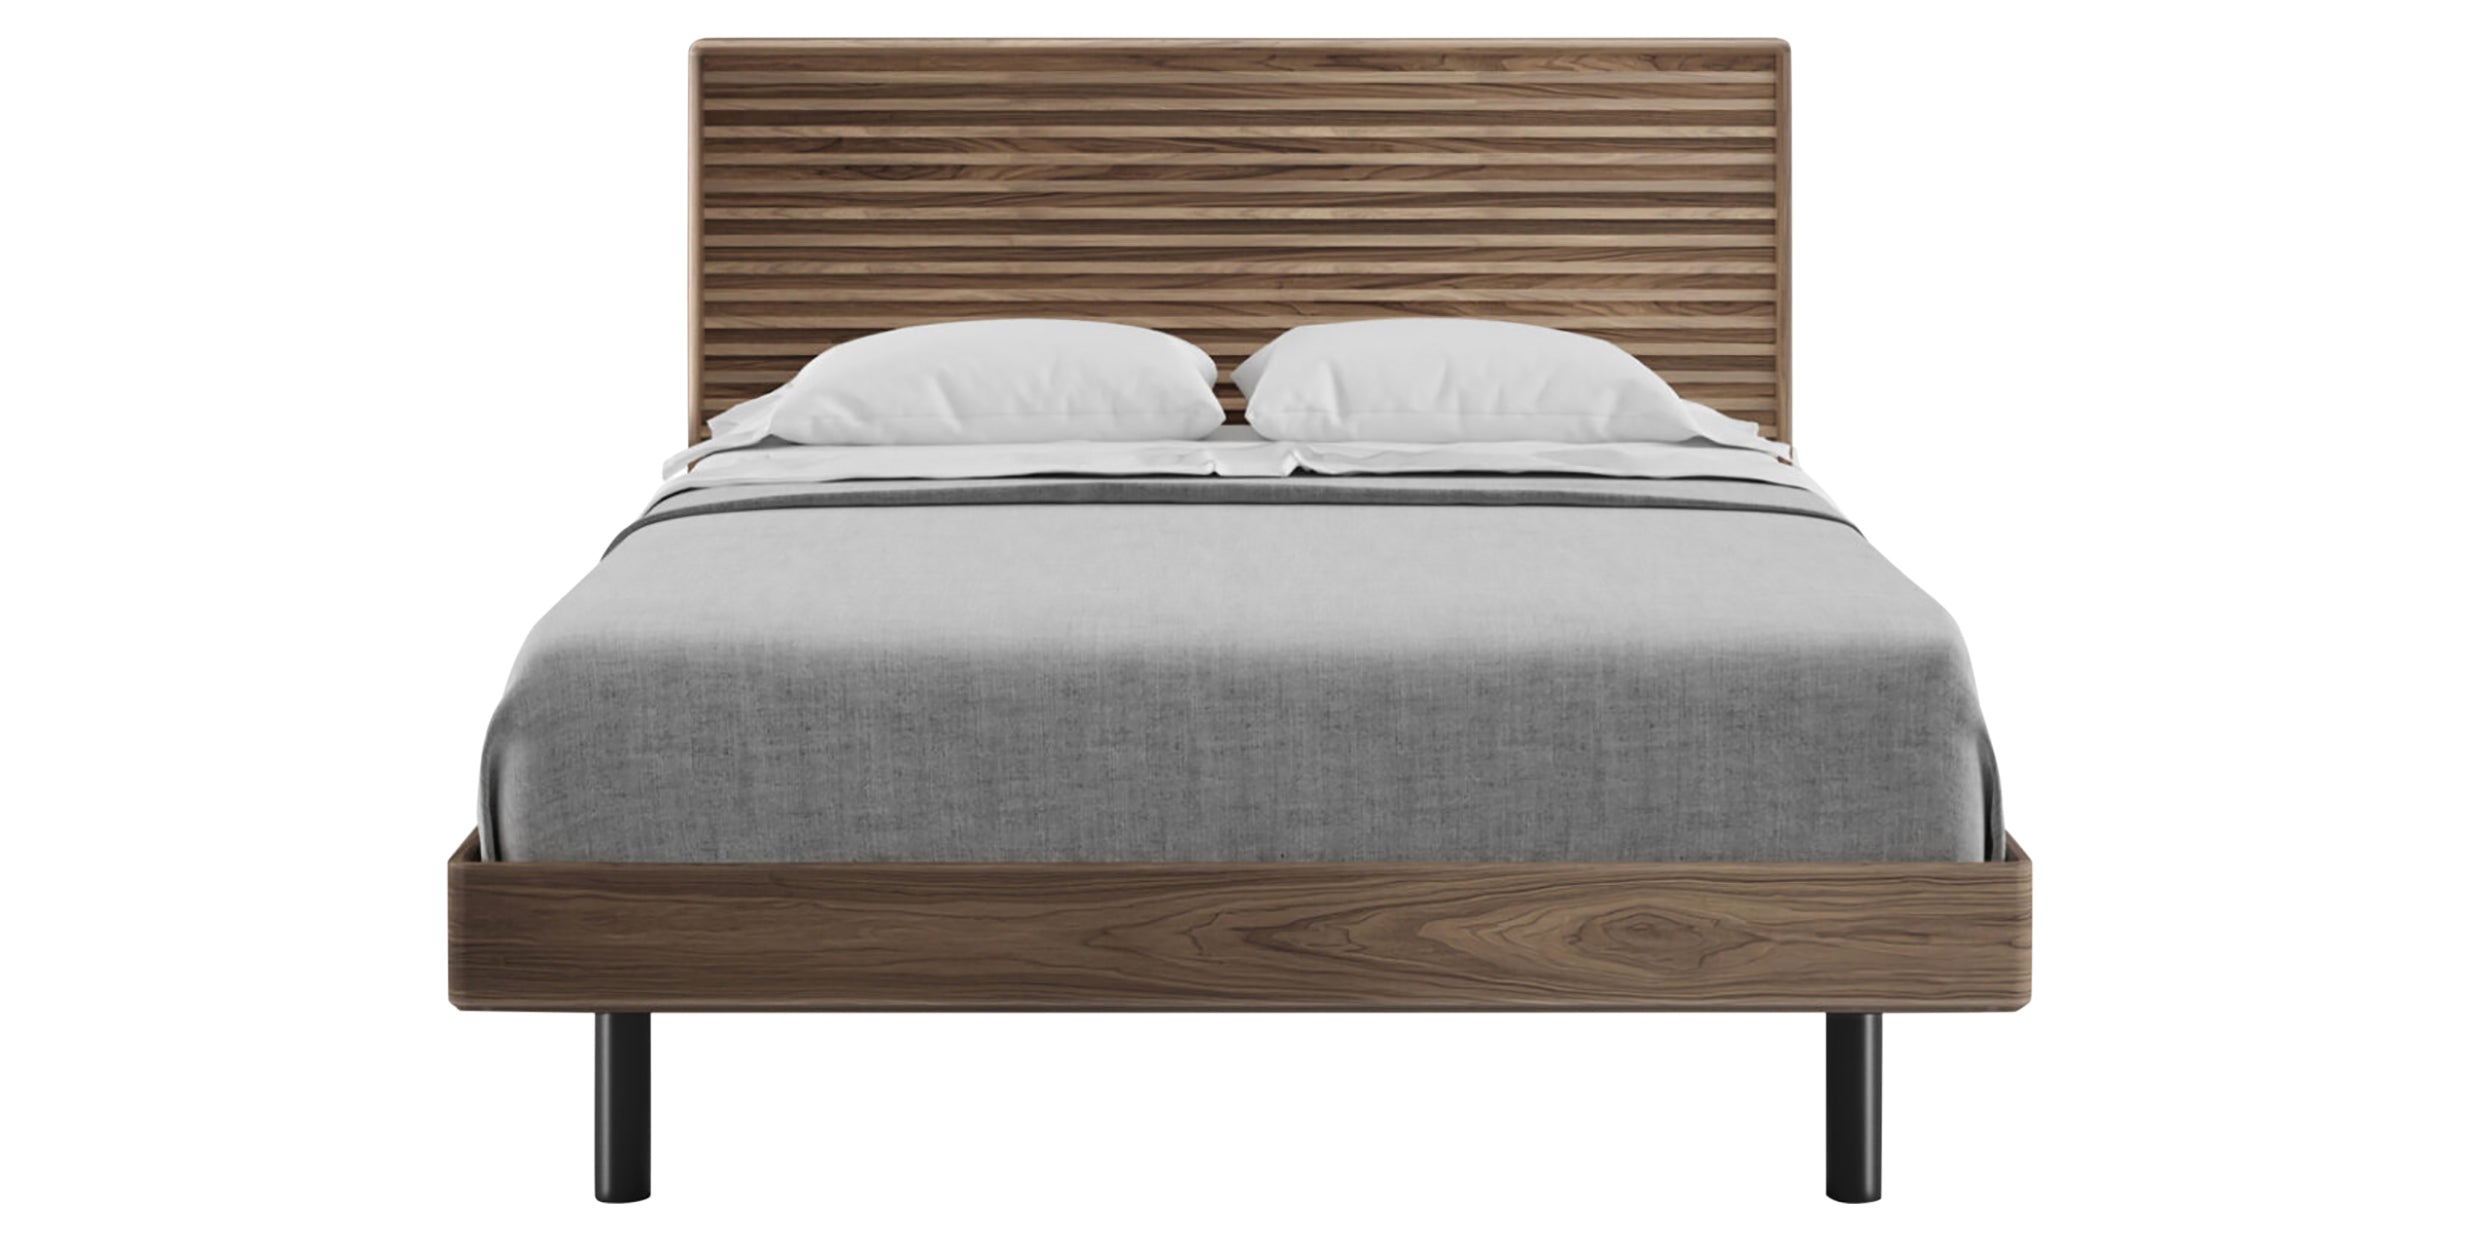 Natural Walnut with Powder Coated Steel and Solid Pine (Queen Size) | BDI Cross-Linq Bed | Valley Ridge Furniture